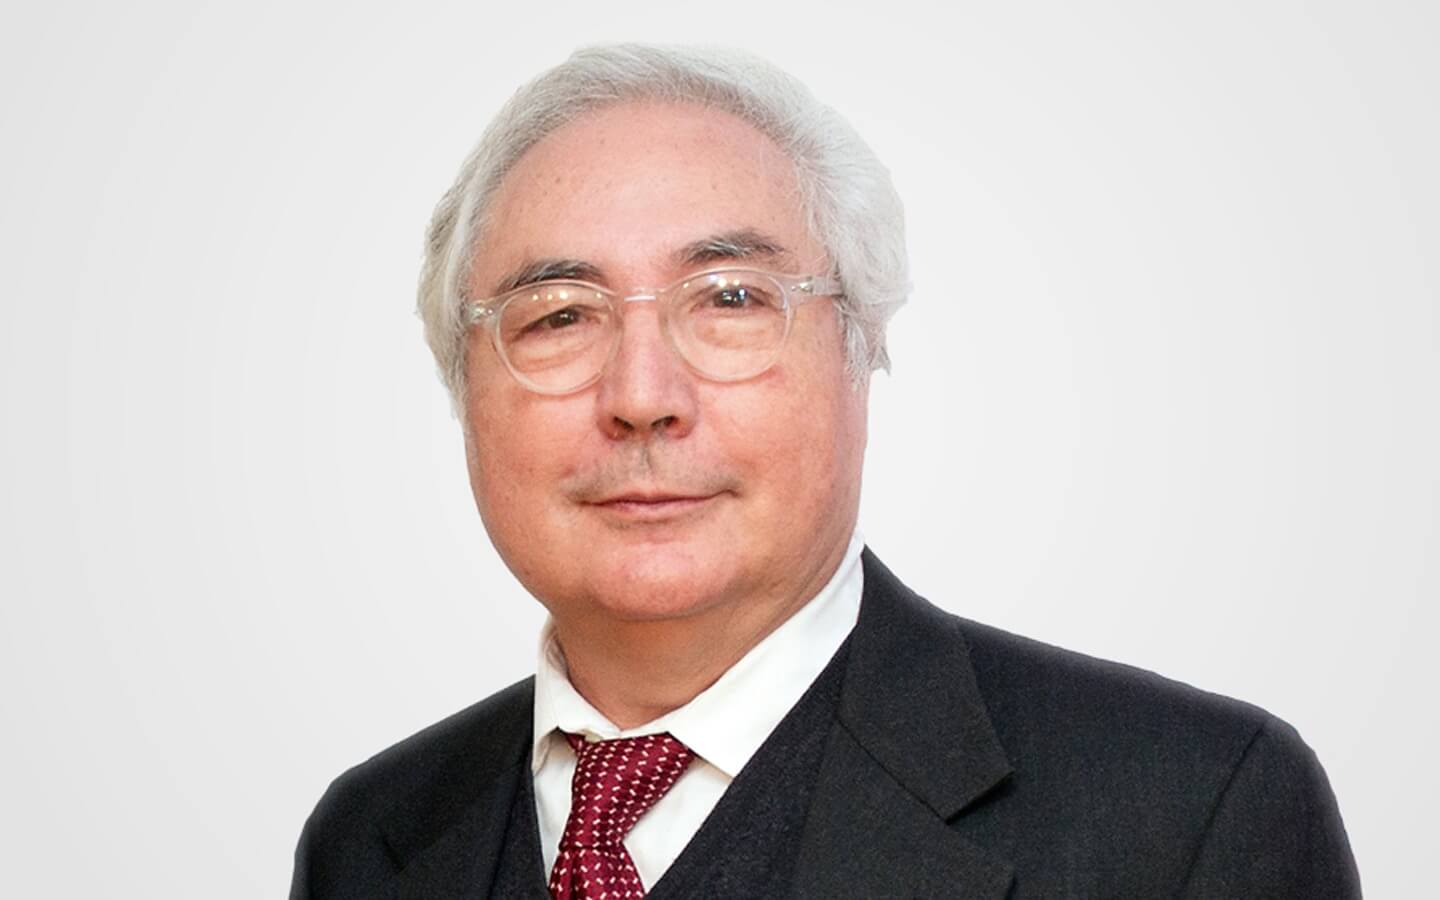 Manuel Castells is a professor and sociologist who has served as Minister for Universities in the Spanish government. Photo: Maggie Smith